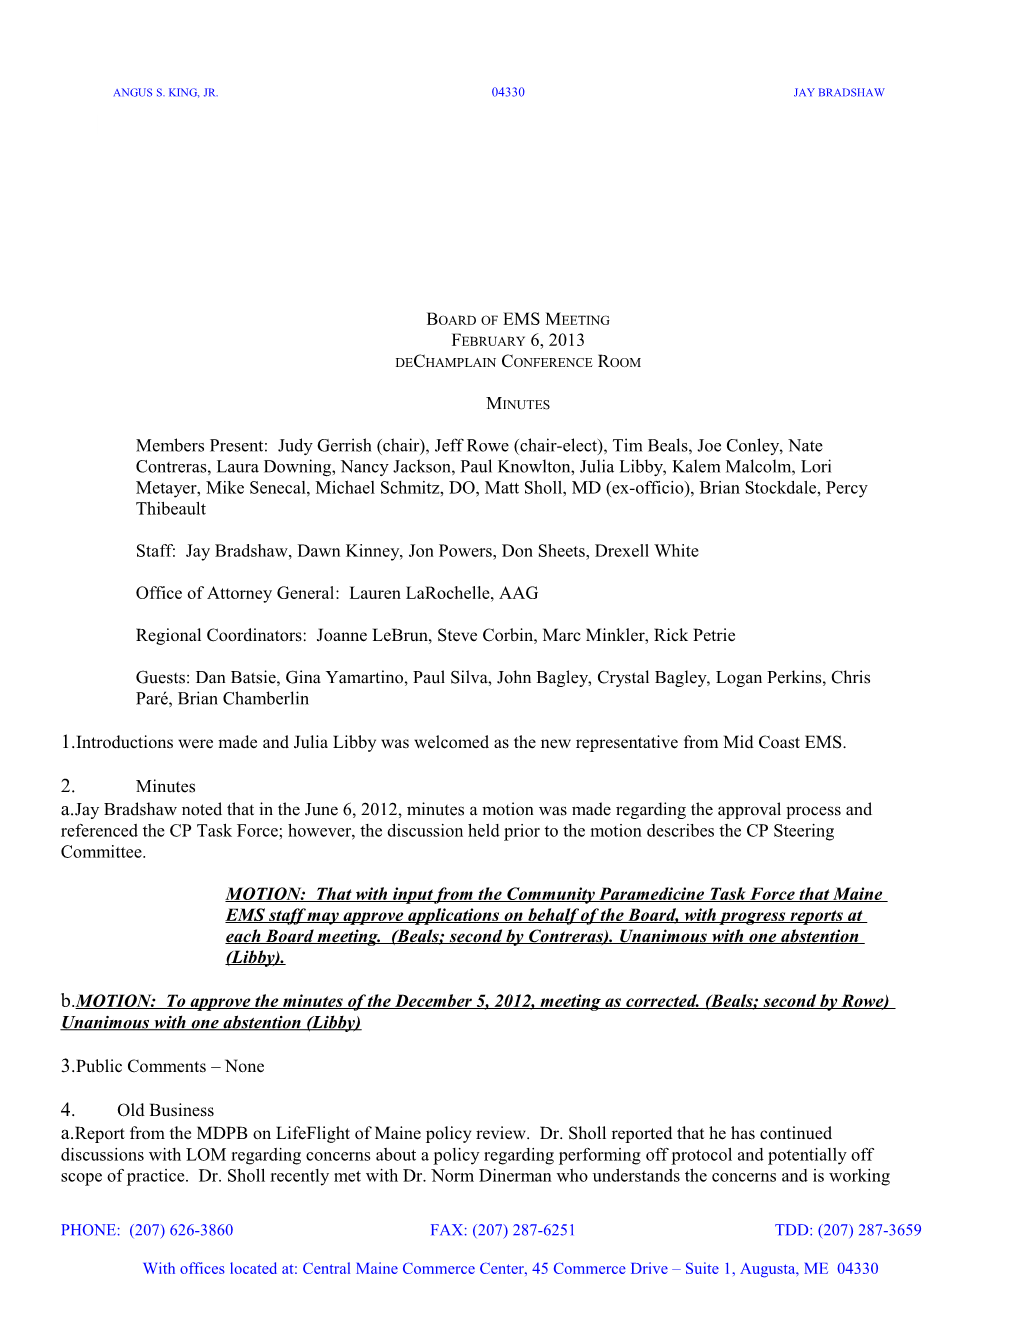 Board of EMS Minutes